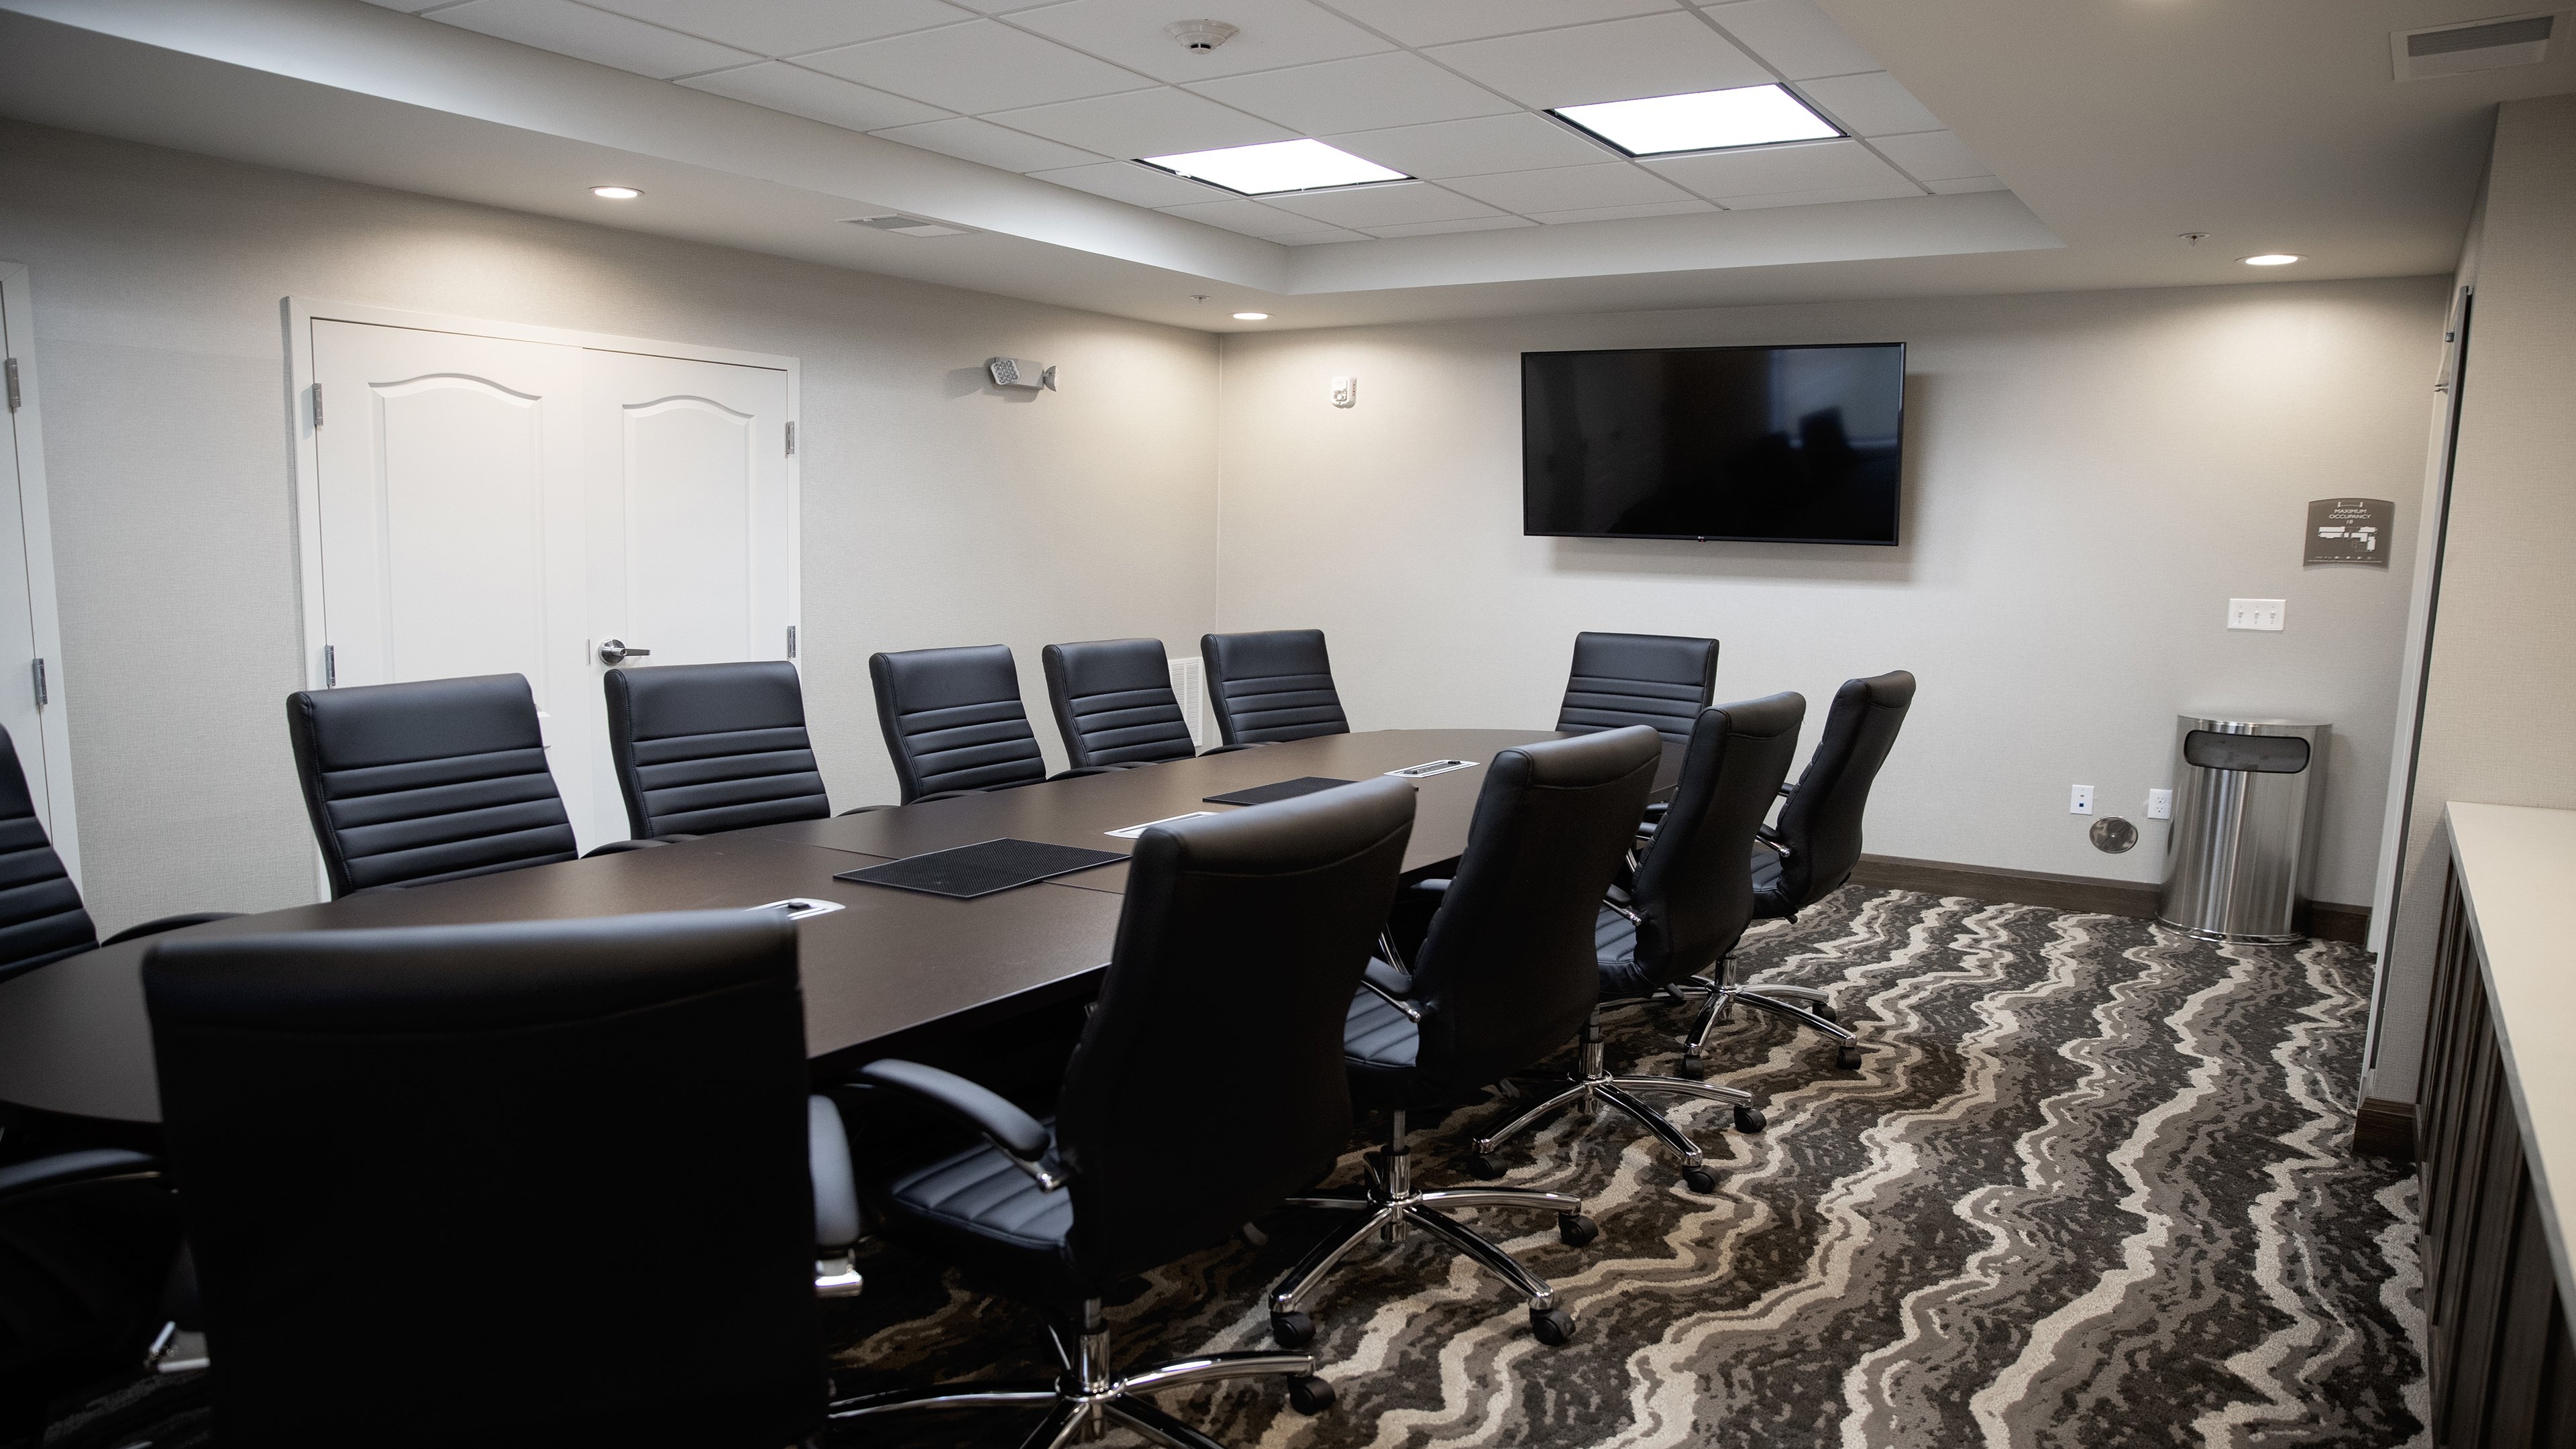 Meeting rooms great for business, training and social events